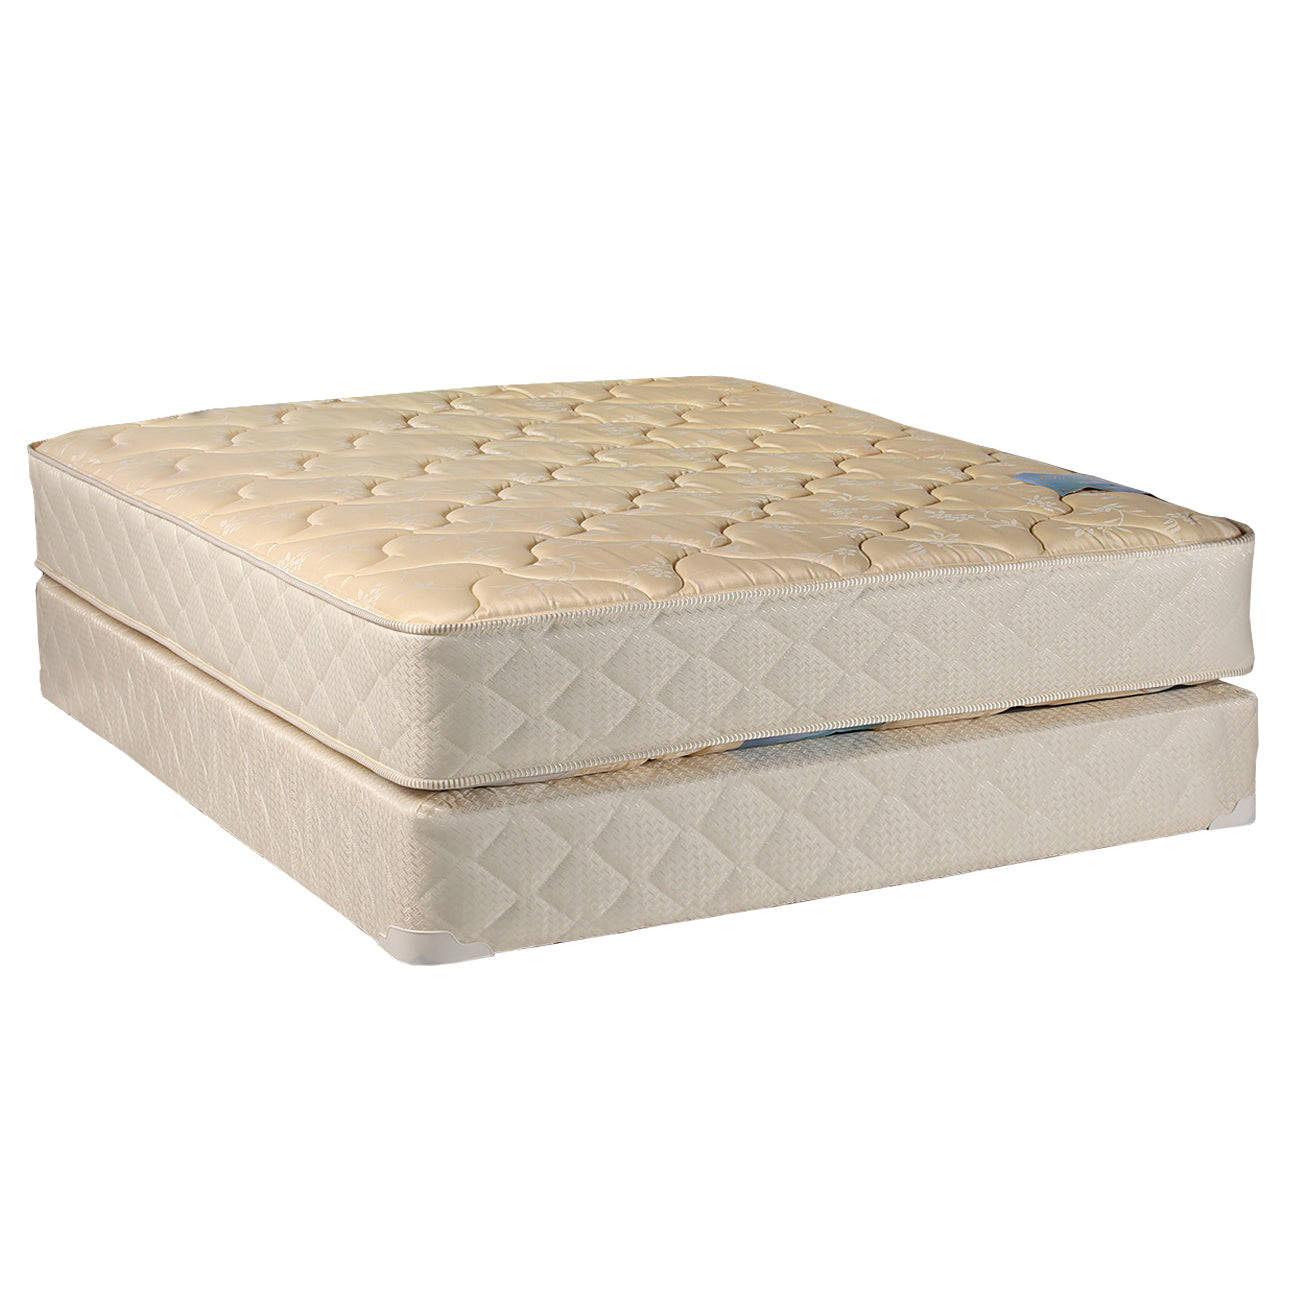  DS Solutions USA Hollywood Gentle Plush Full PillowTop 2-Sided  Mattress Set with Bed Frame Included - Orthopedic, Sleep System with  Enhanced Cushion Support, Longlasting : Home & Kitchen